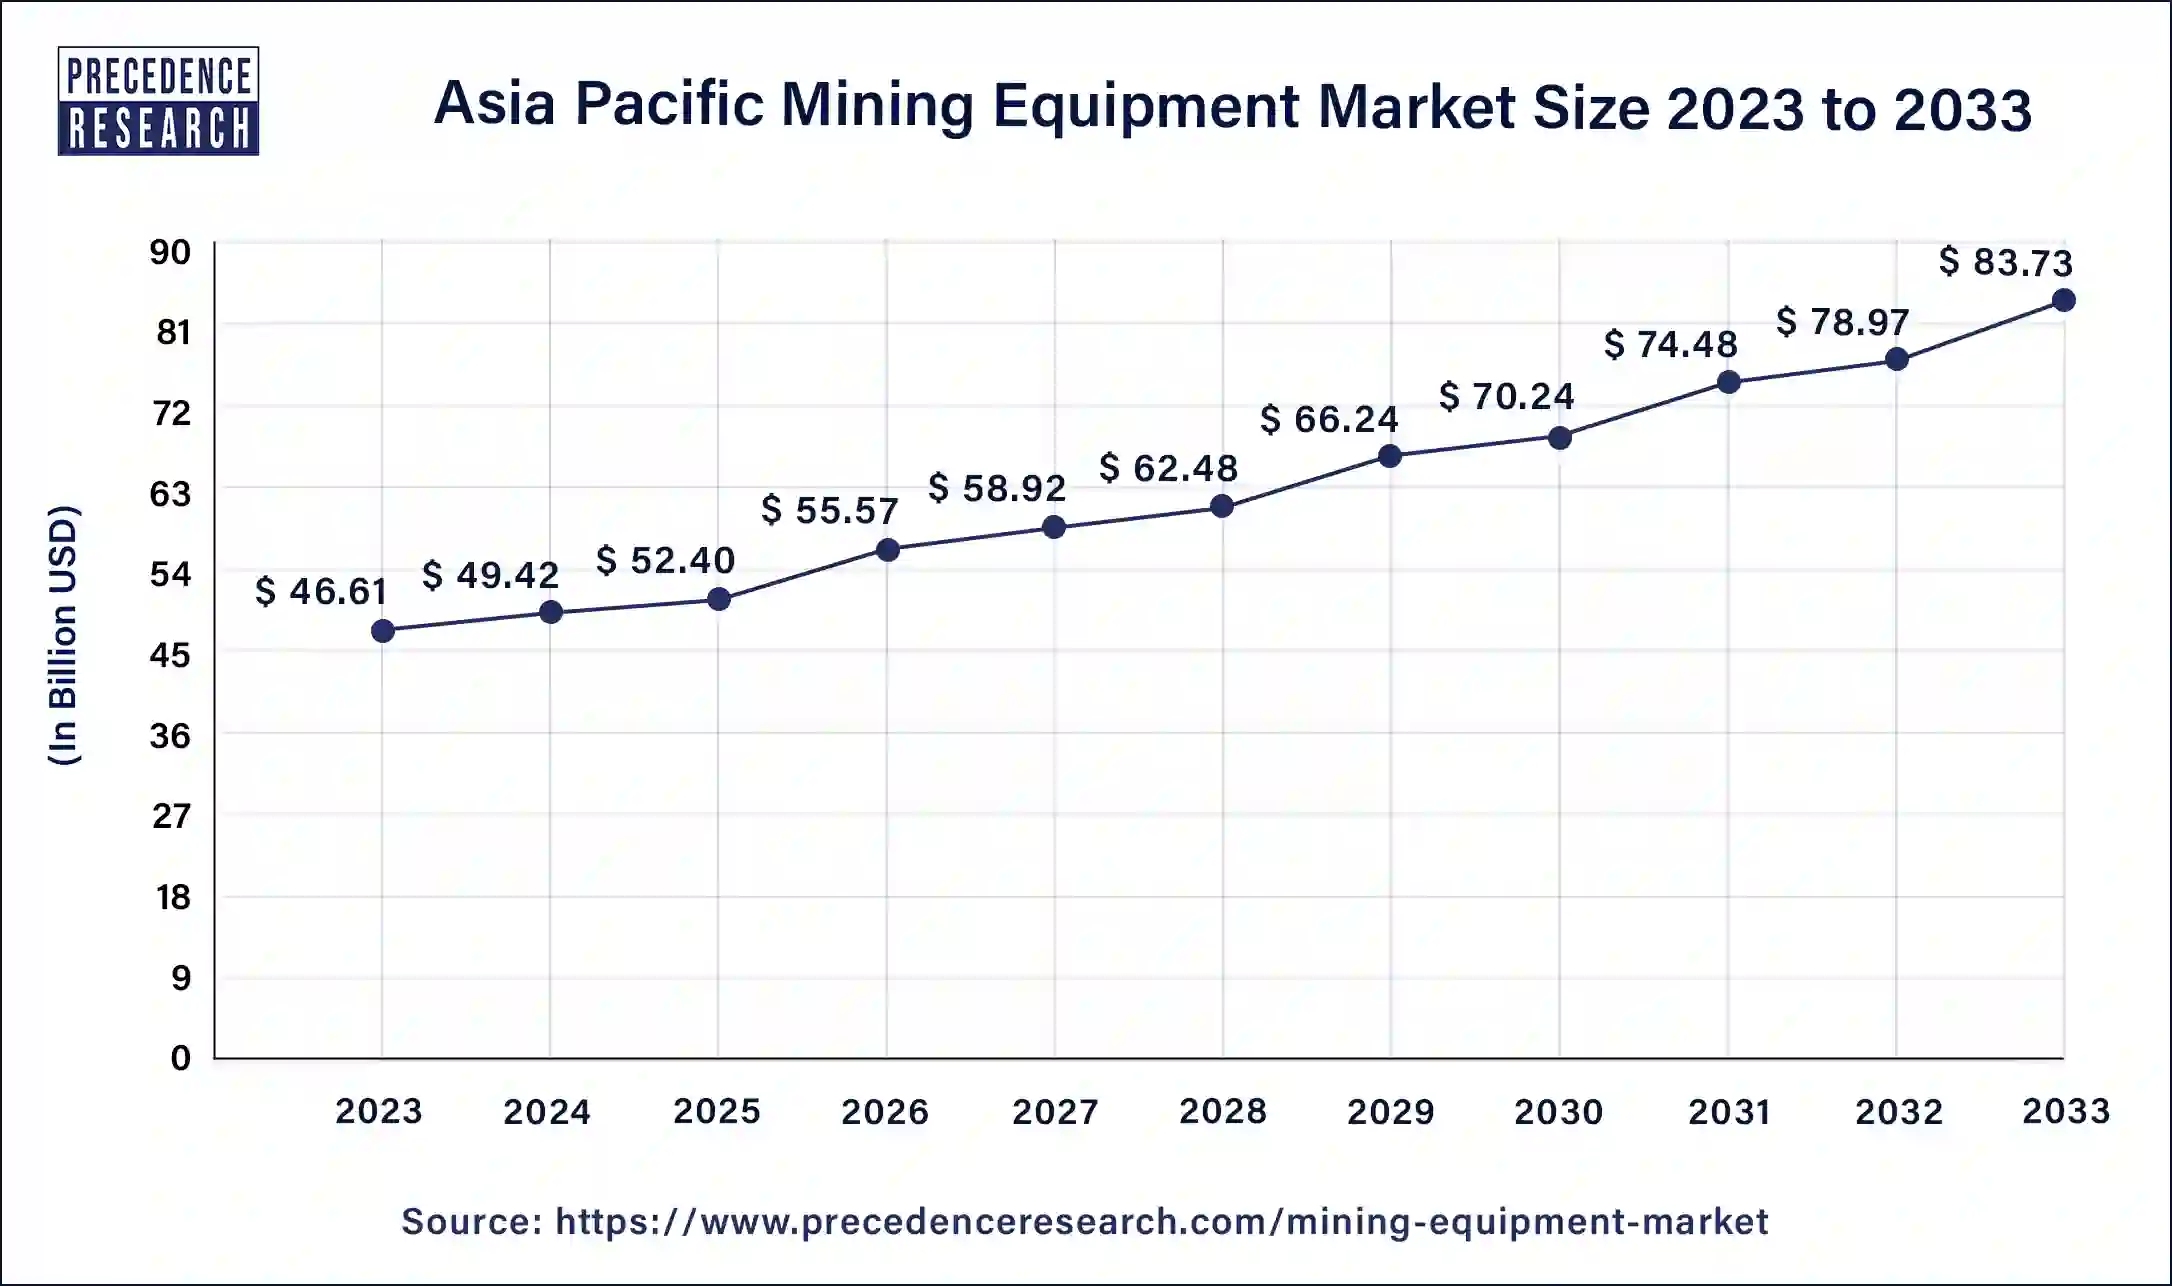 Asia Pacific Mining Equipment Market Size 2024 to 2033